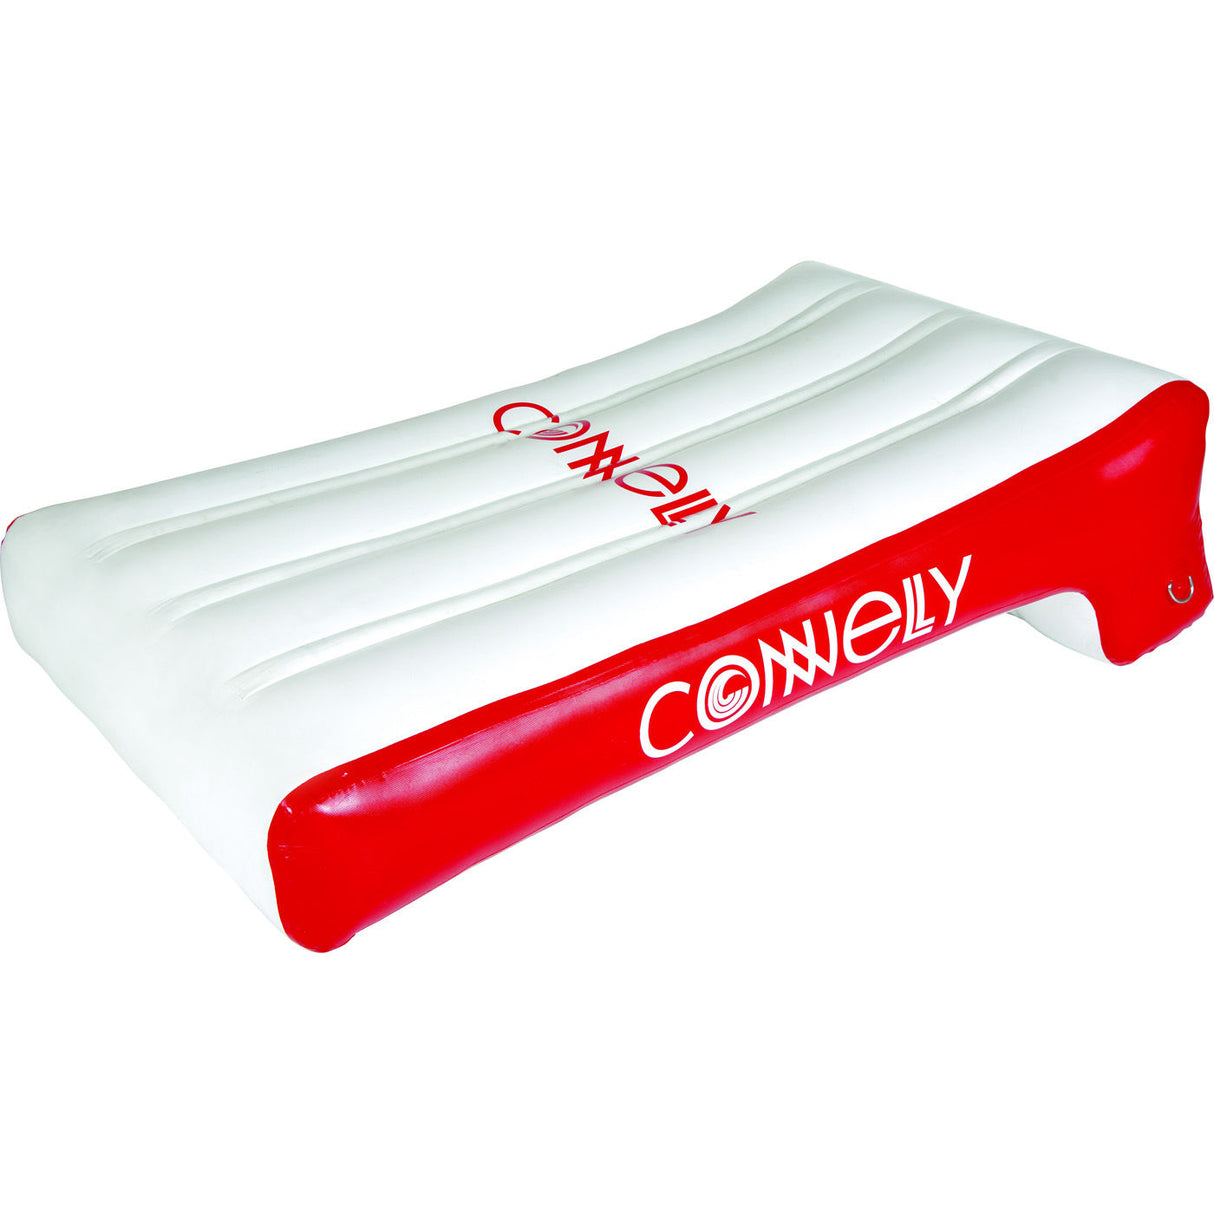 Connelly Boat Slide